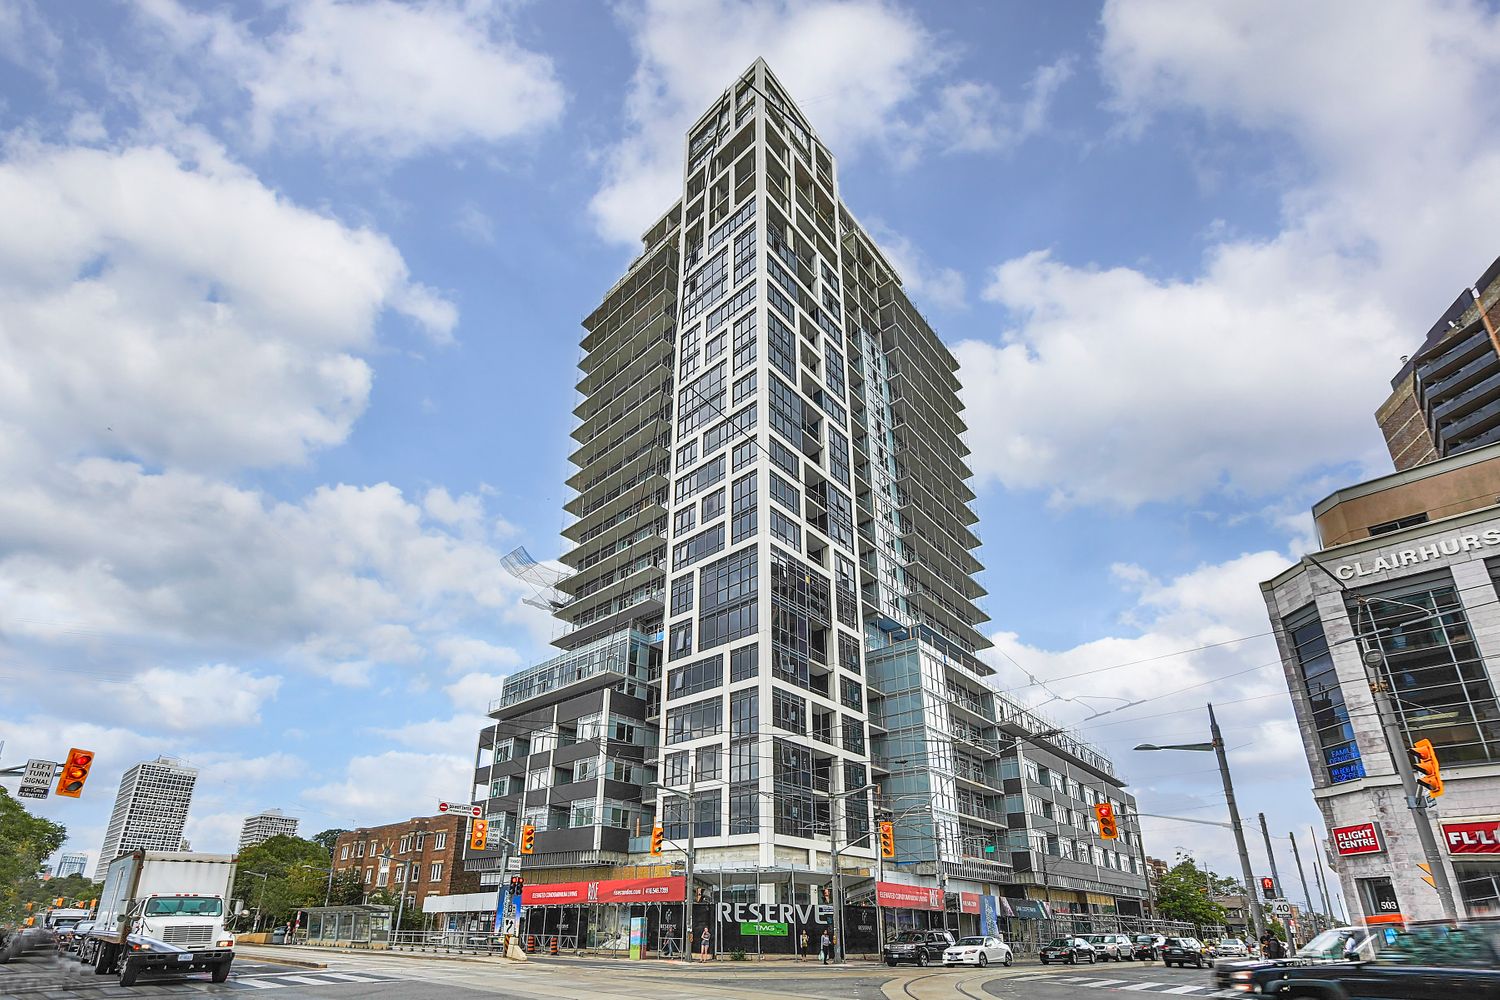 501 St Clair Avenue W. Rise Condos is located in  Midtown, Toronto - image #1 of 2